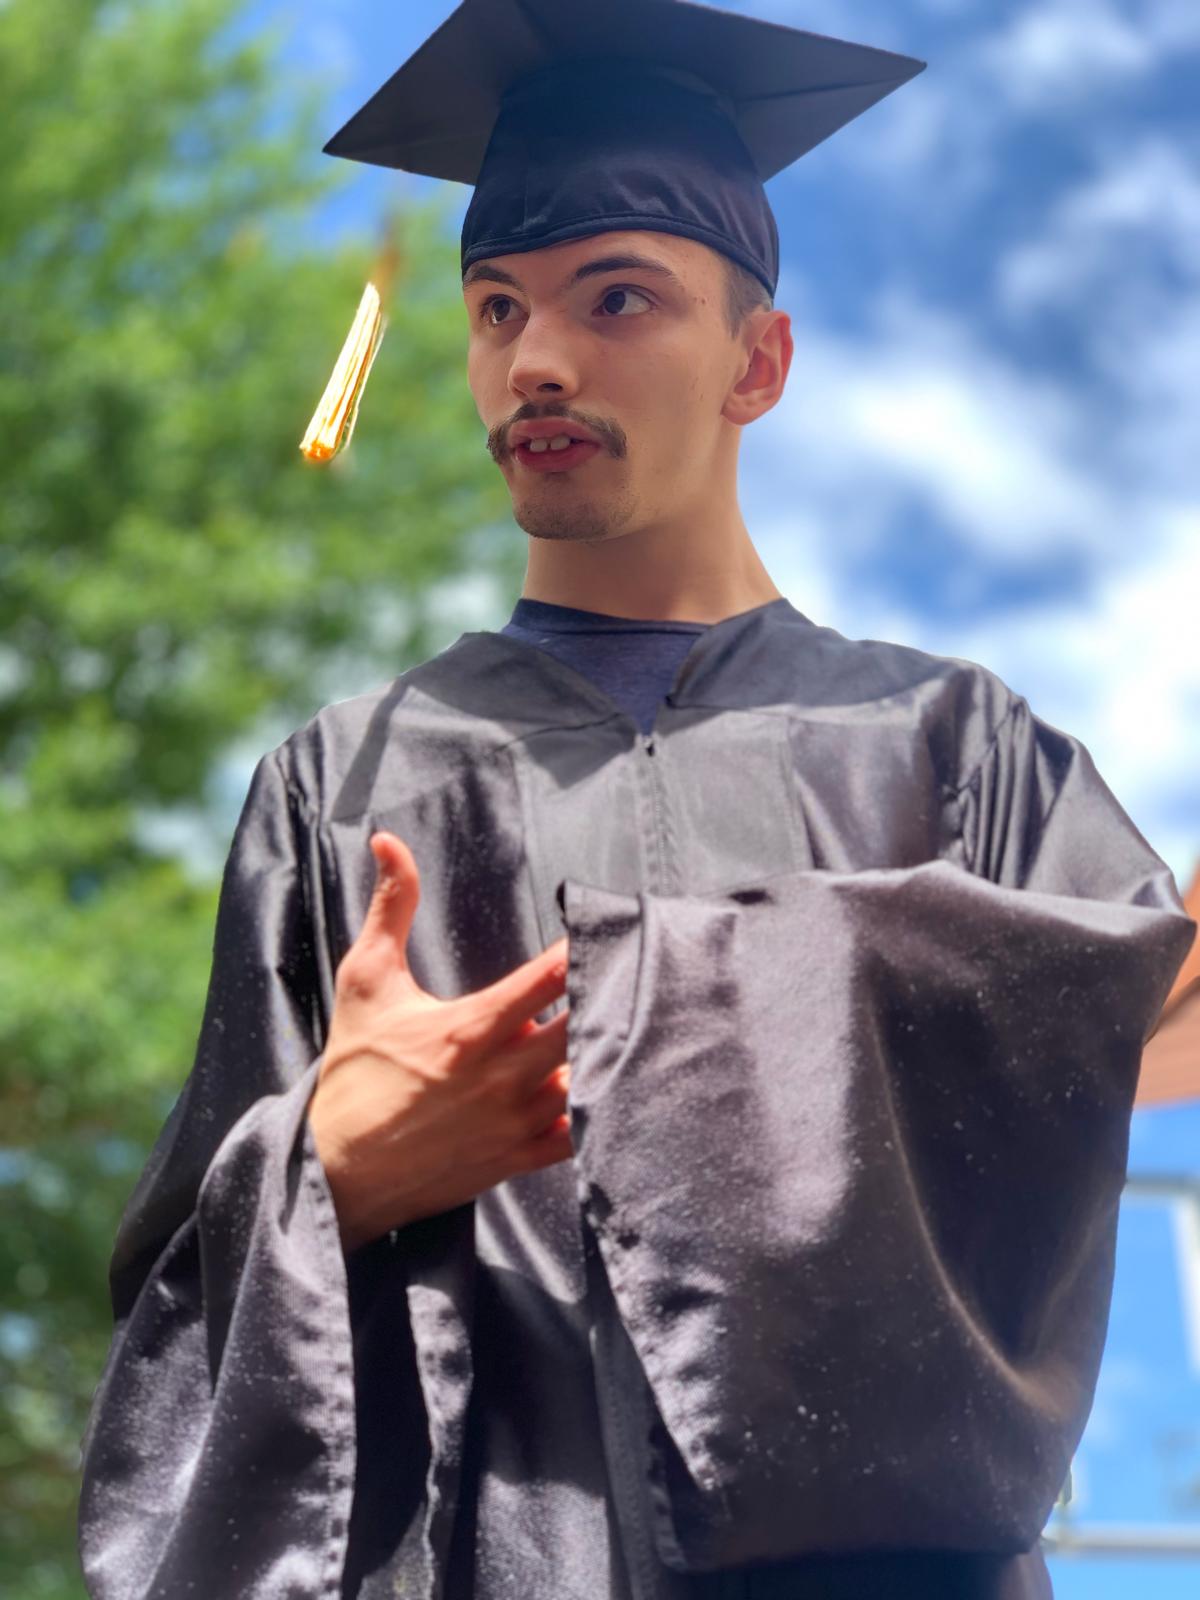 Odin dressed in his high school graduation cap and gown (Courtesy of <a href="https://www.instagram.com/quaruntim/">Tim Frost</a>)